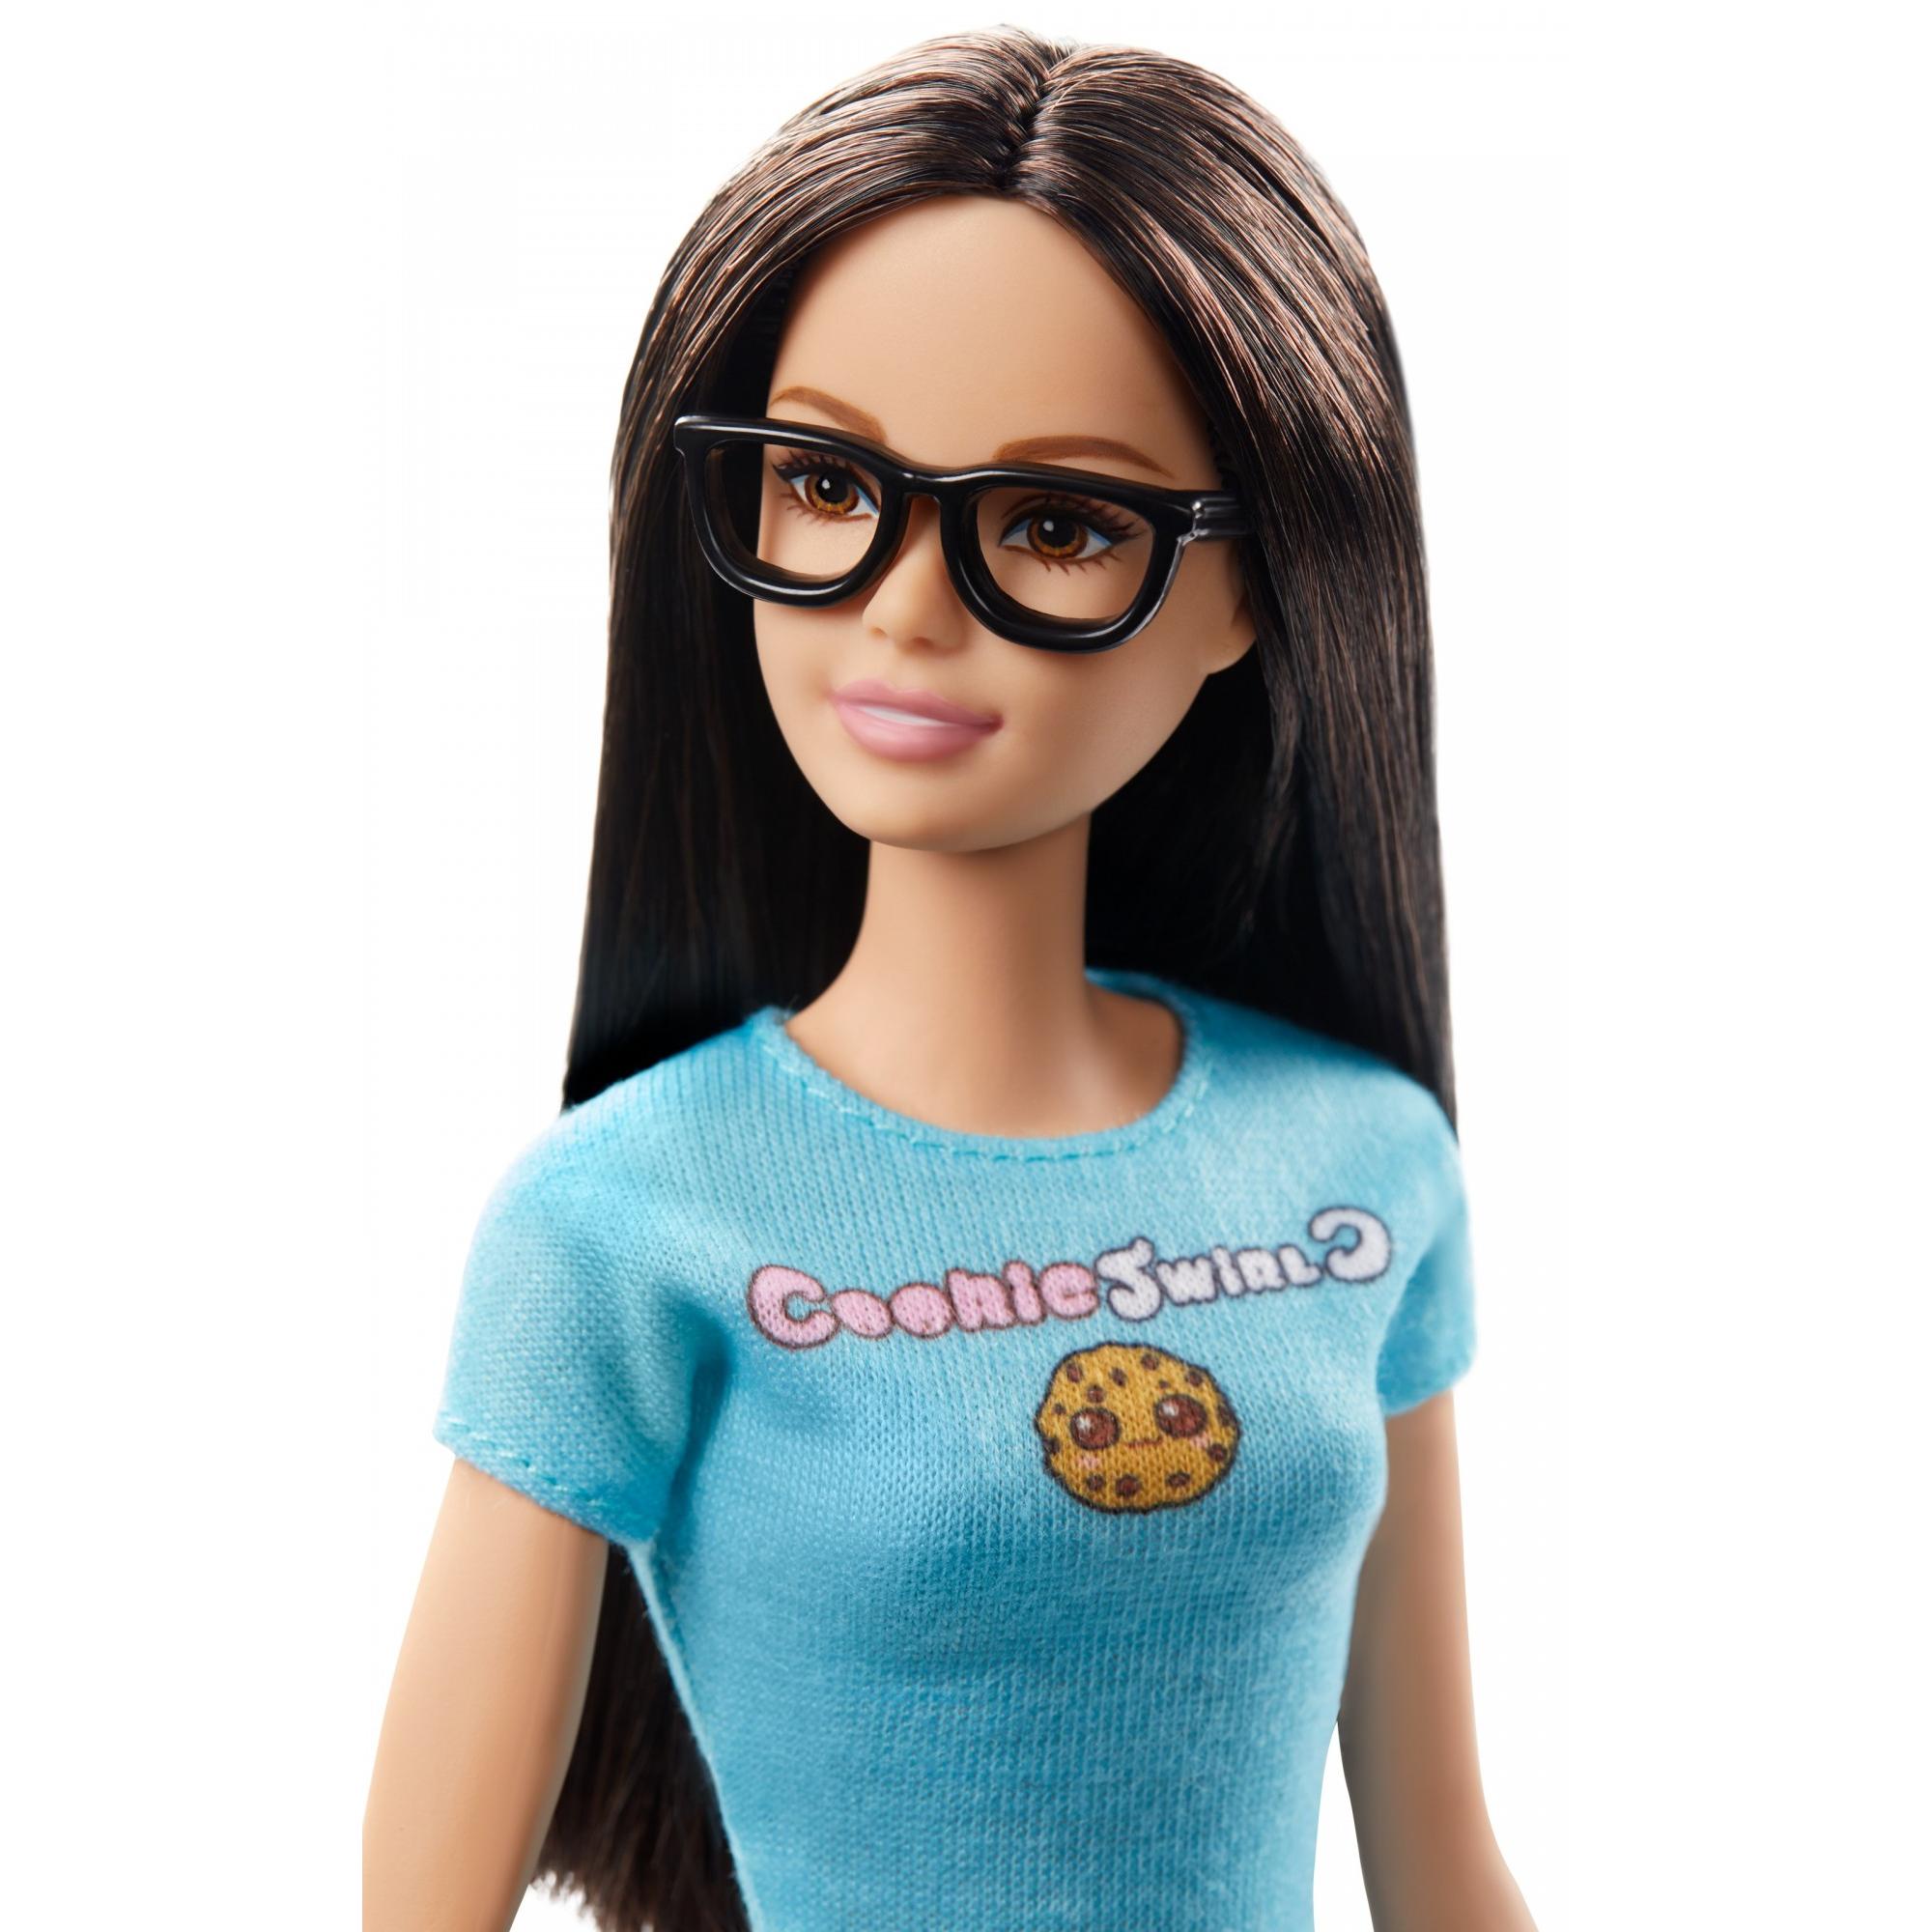 Barbie Cookieswirlc Doll And Accessories